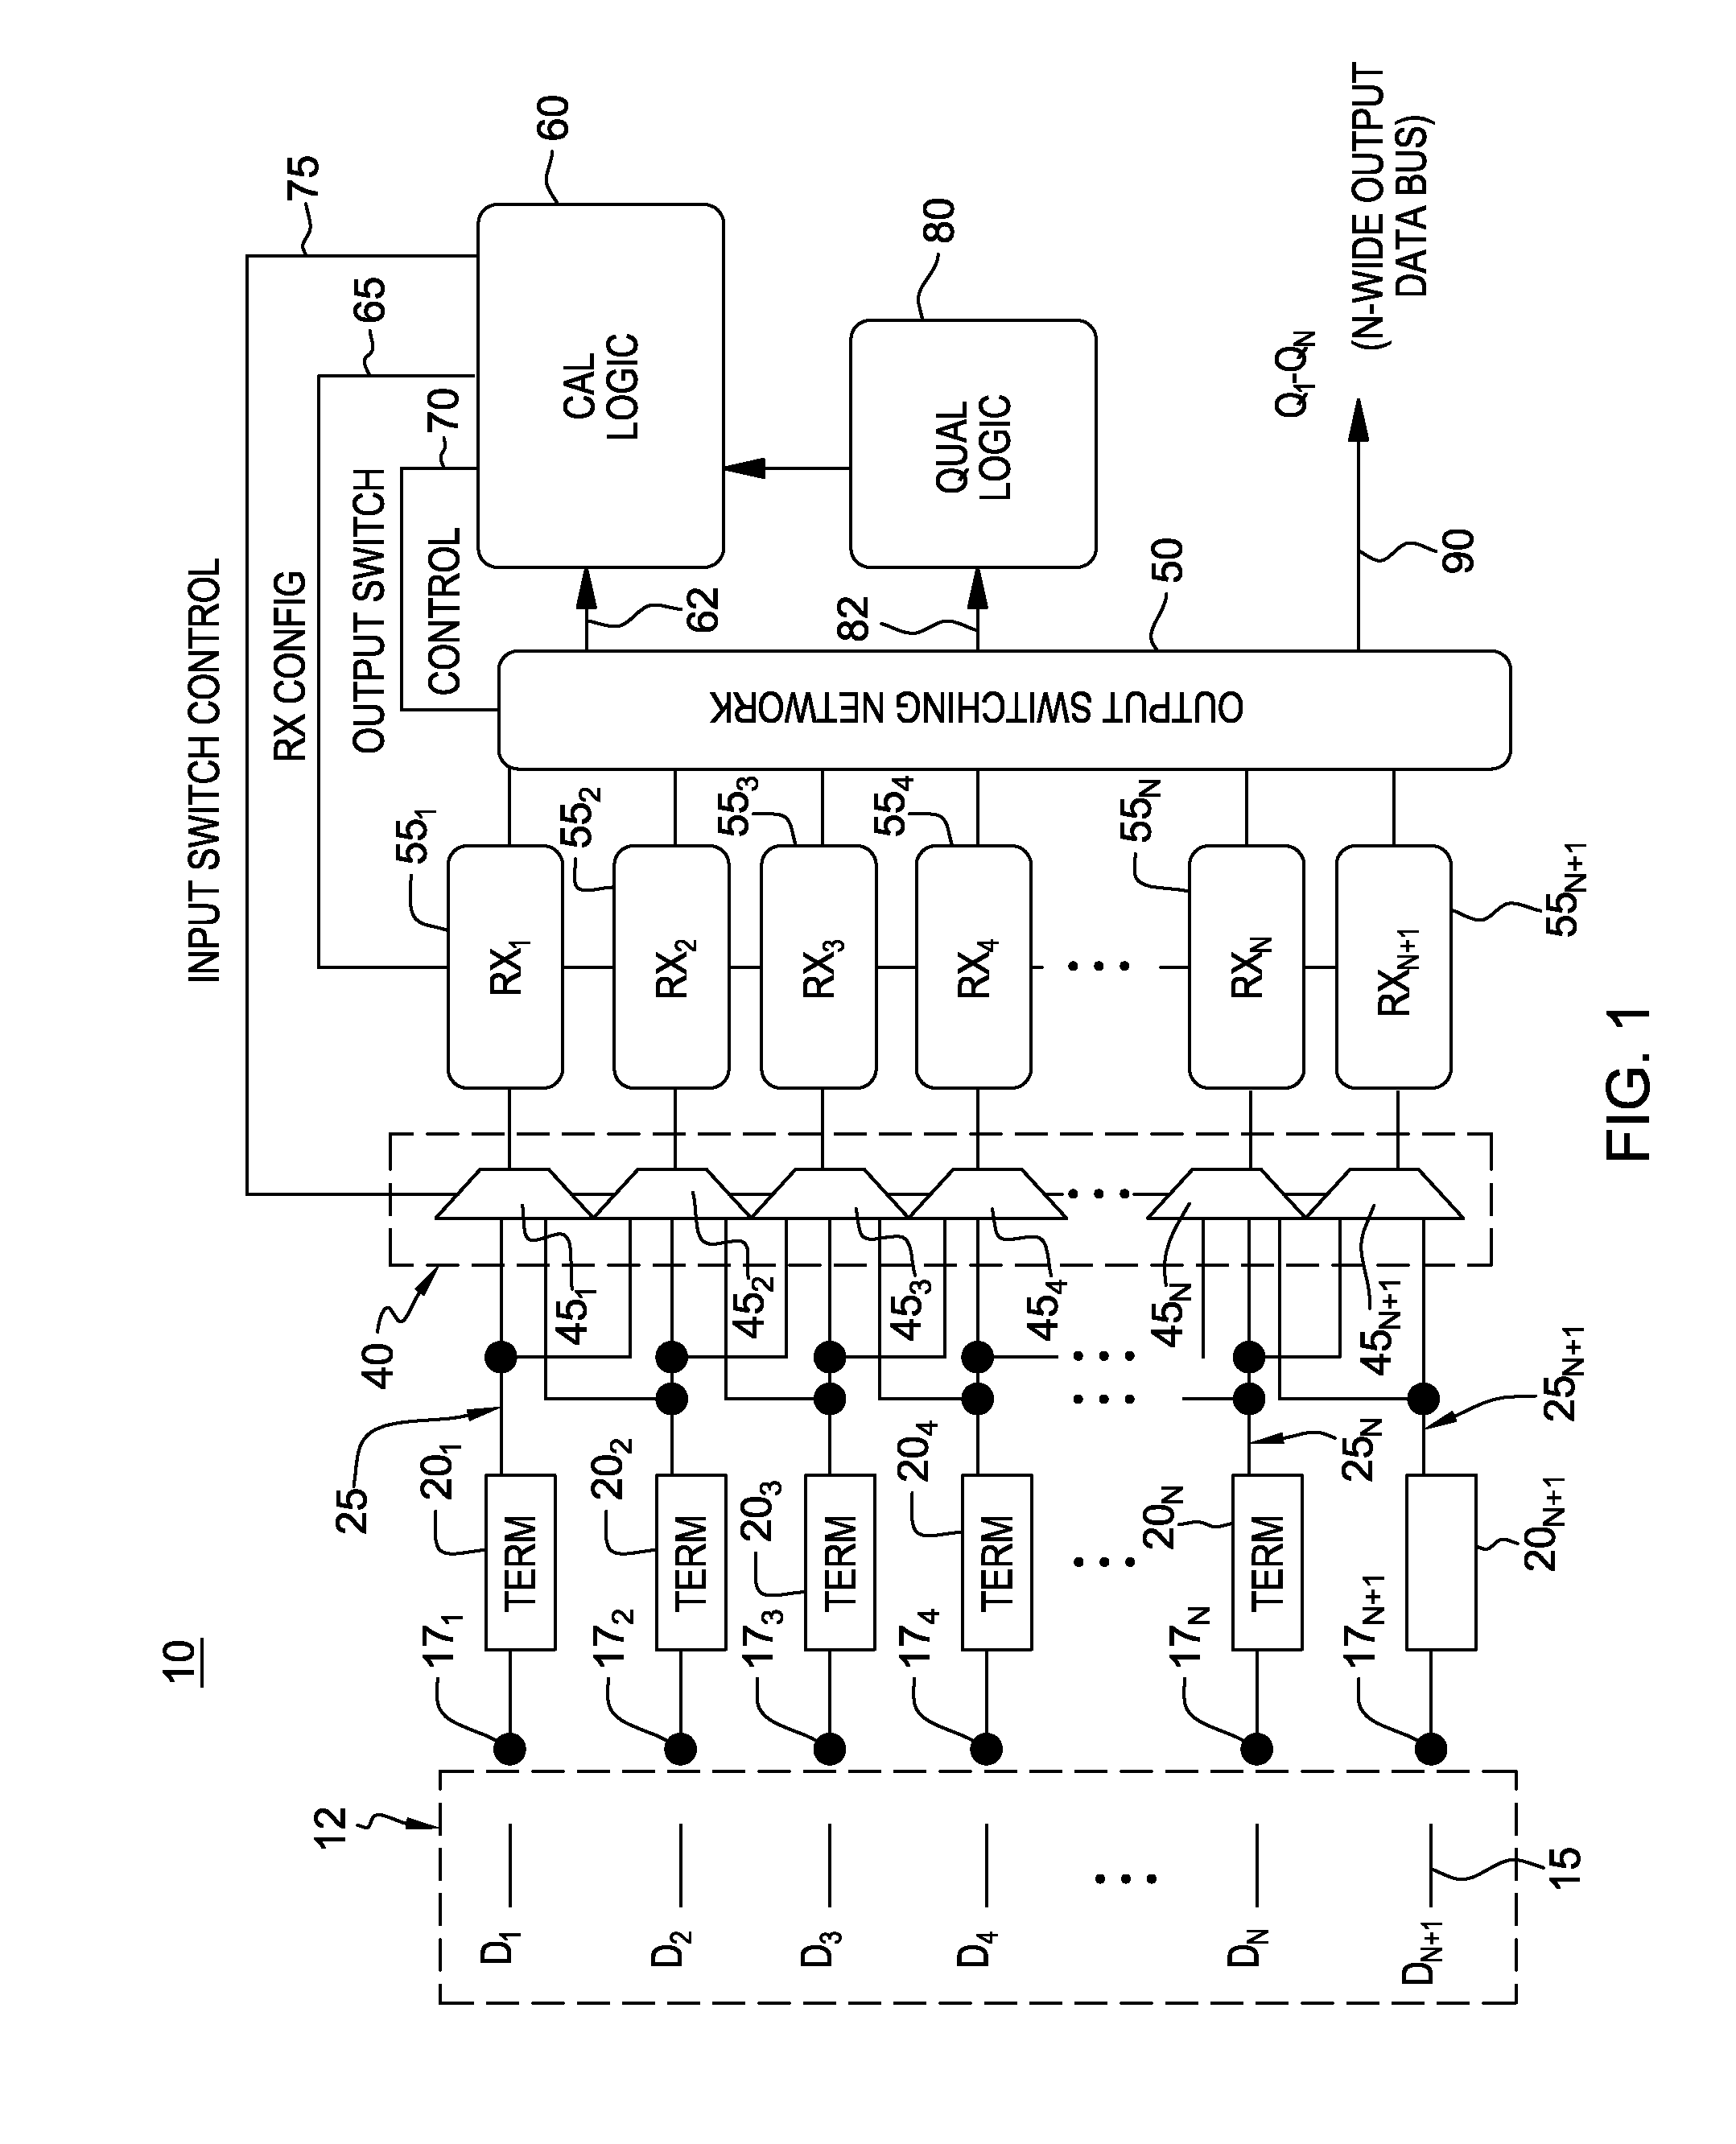 Fault tolerant parallel receiver interface with receiver redundancy